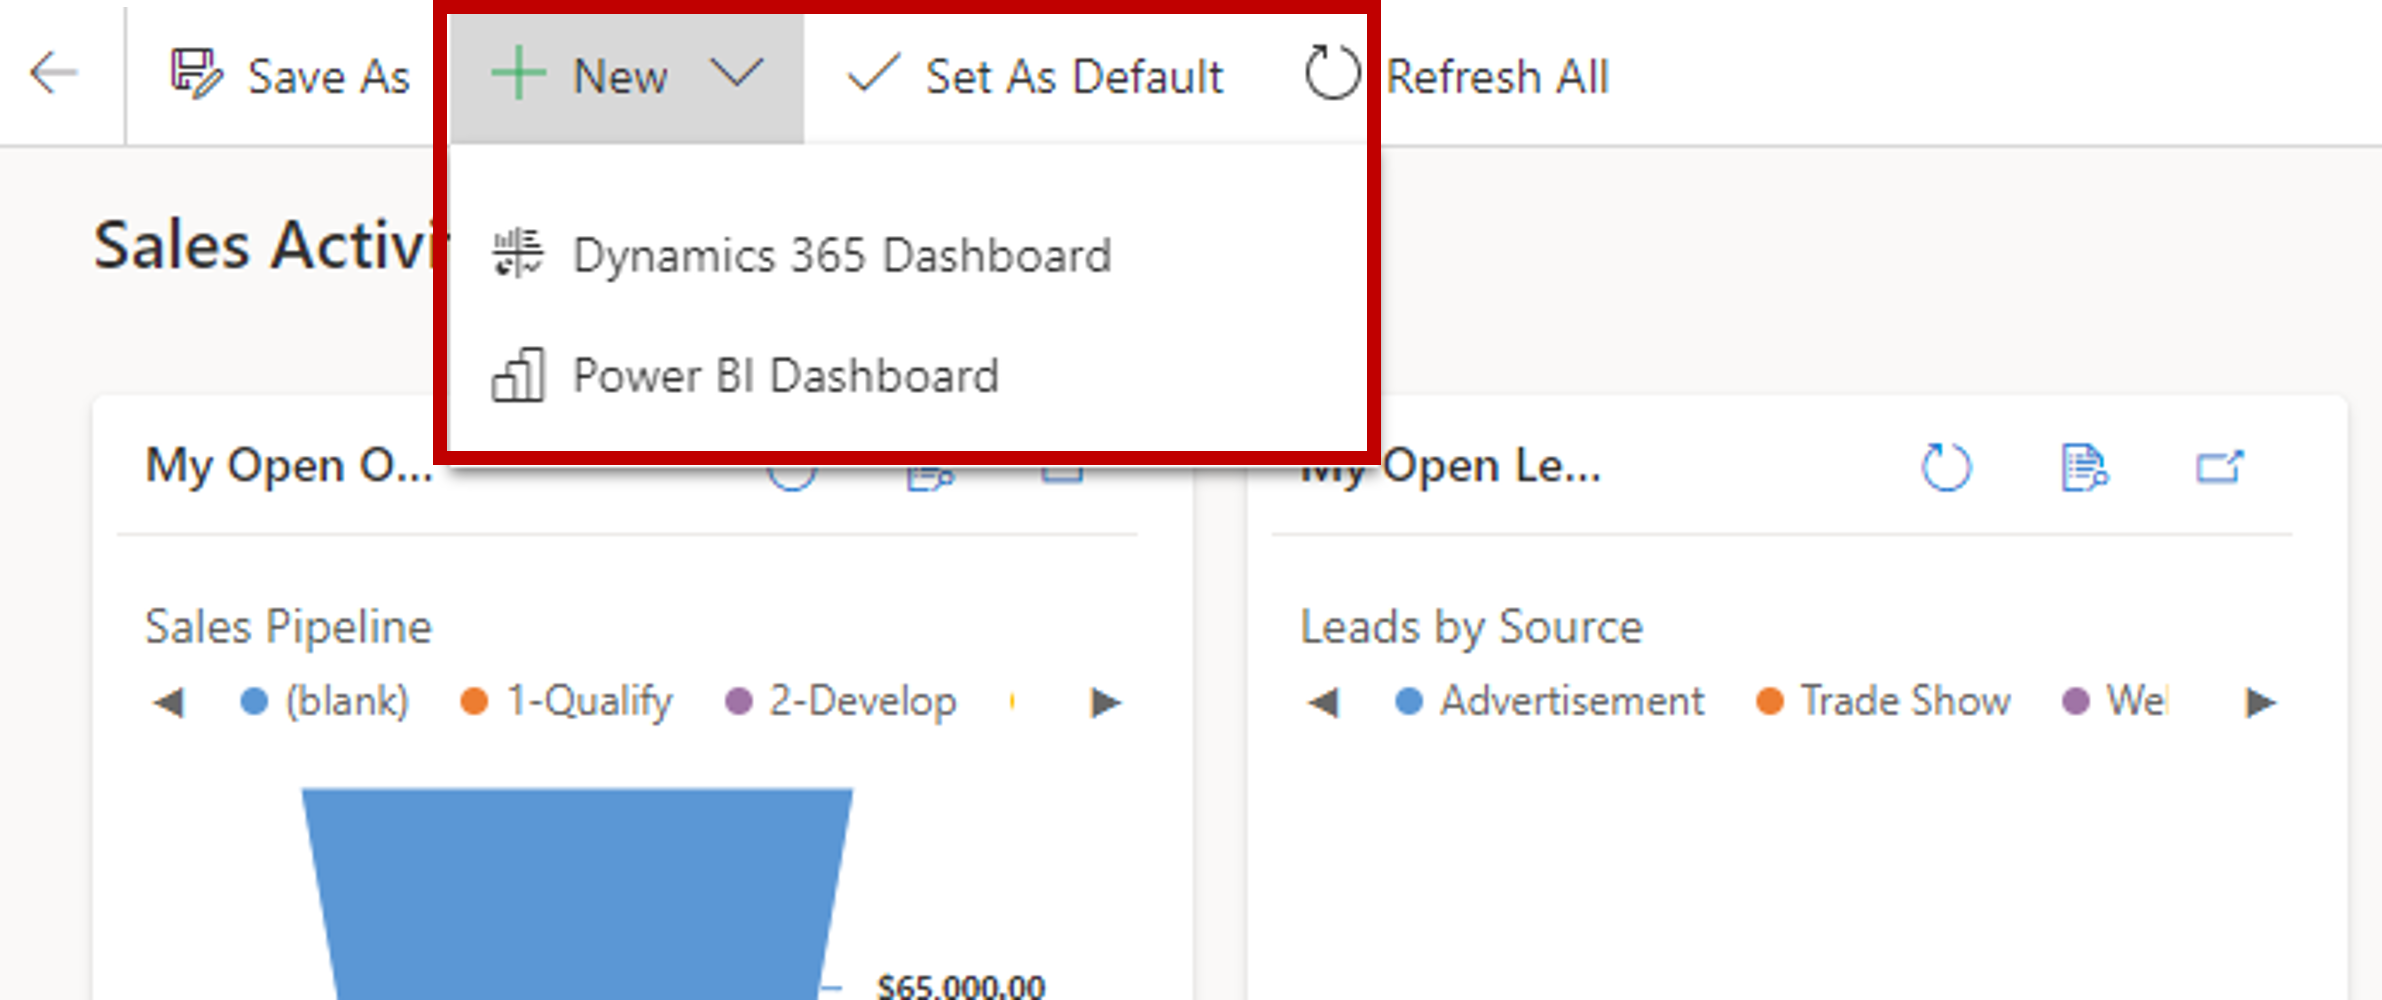 Screenshot showing the New button dropped down to reveal the Power BI dashboard option.